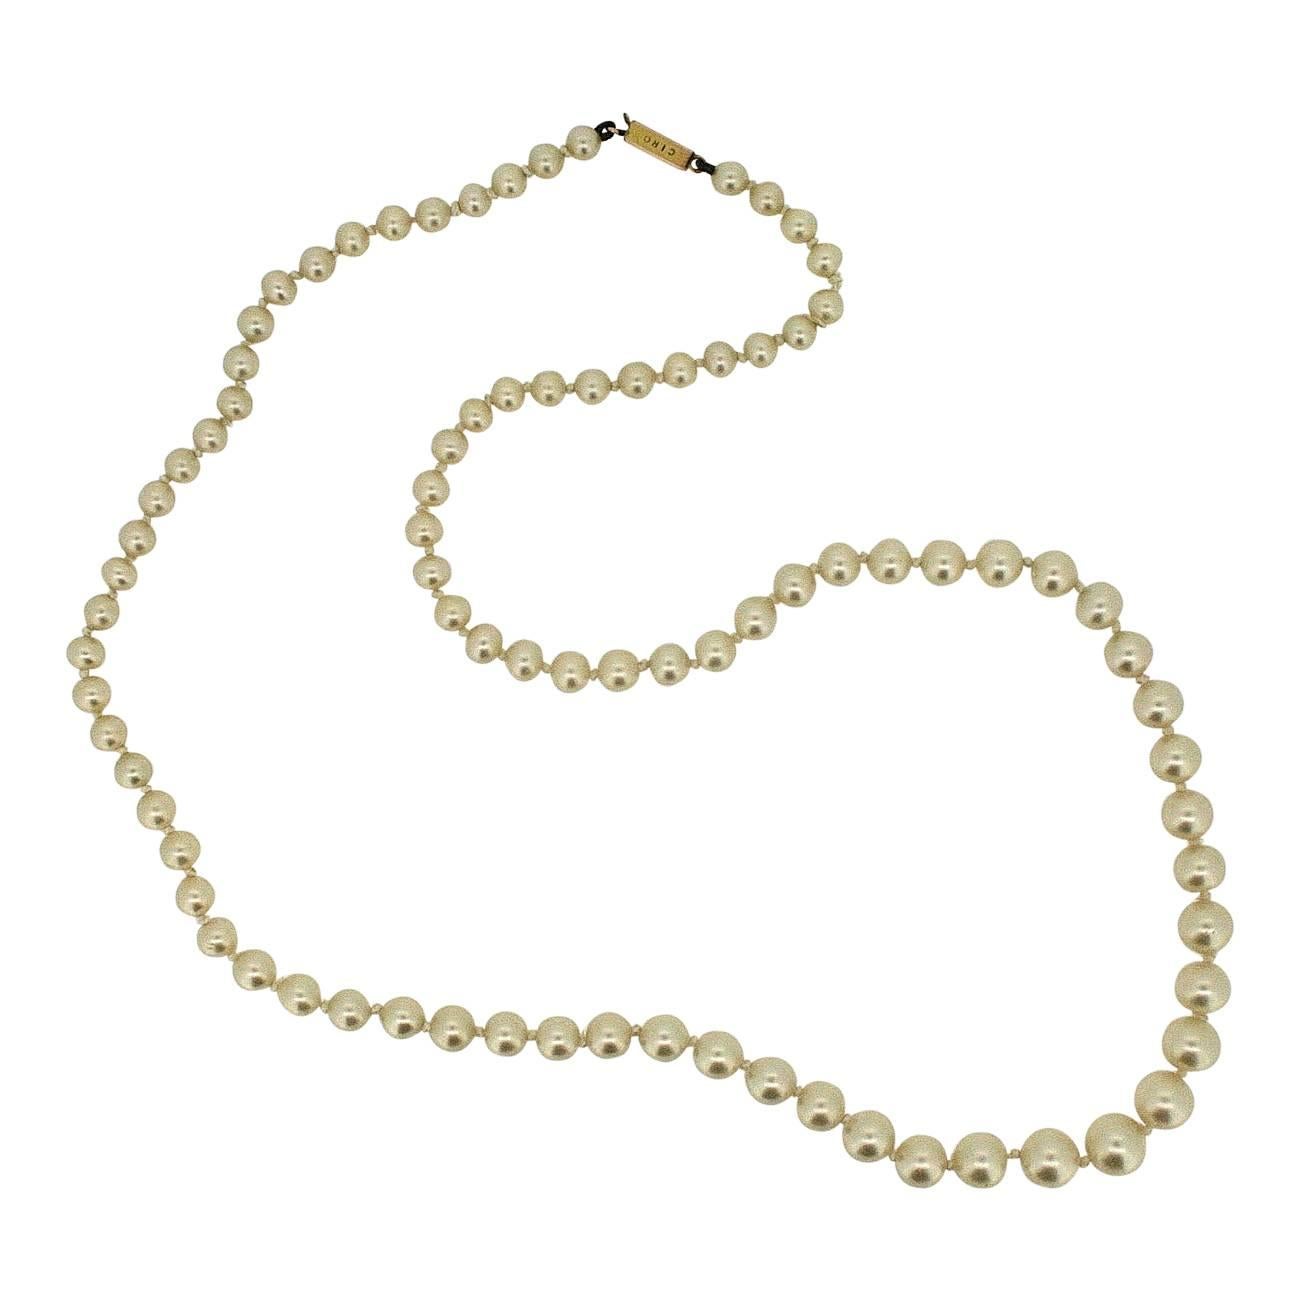 Beautiful and classic, this faux pearl necklace dates from the 1950s. It was created by Ciro - the ultimate maker of cultured pearls. 
Condition Report:
Excellent
The Details...
This necklace features a single strands of hand-knotted cultured pearls